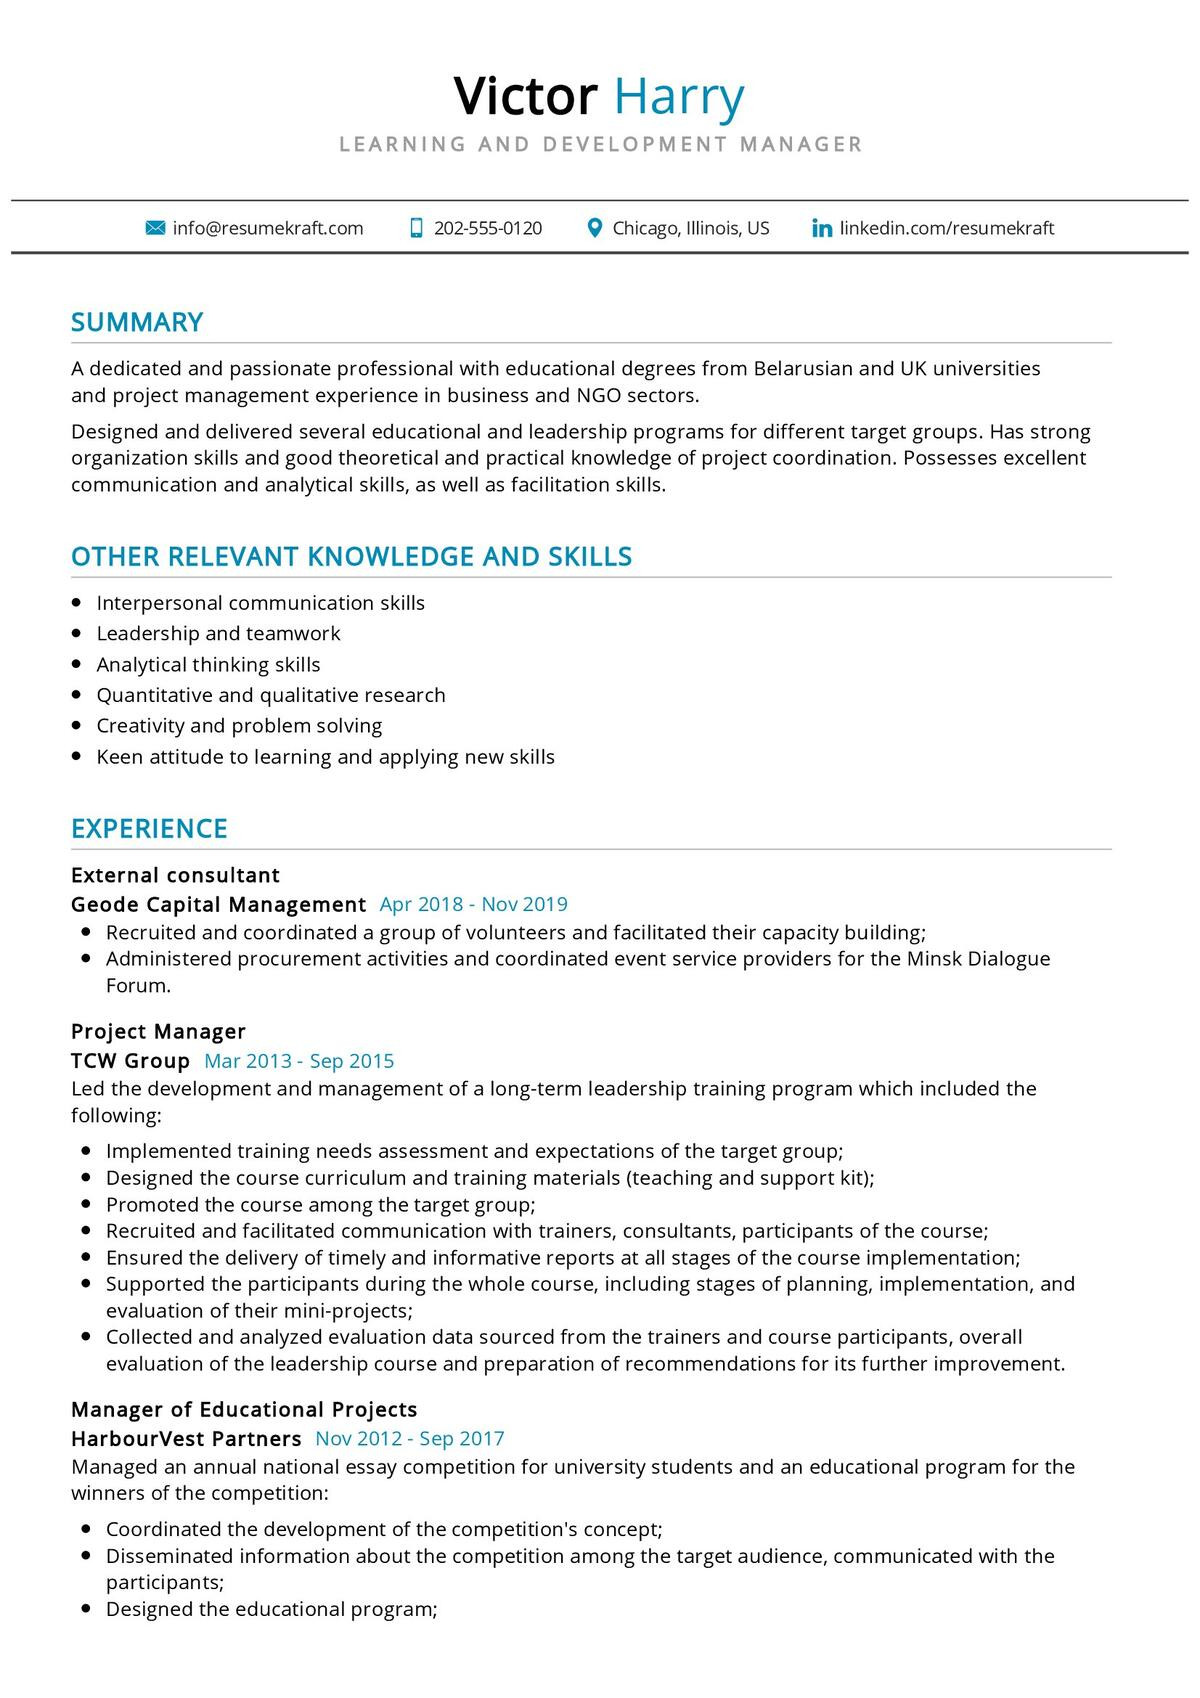 Learning and Development Manager Sample Resume Learning and Development Manager Resume 2021 Writing Guide …